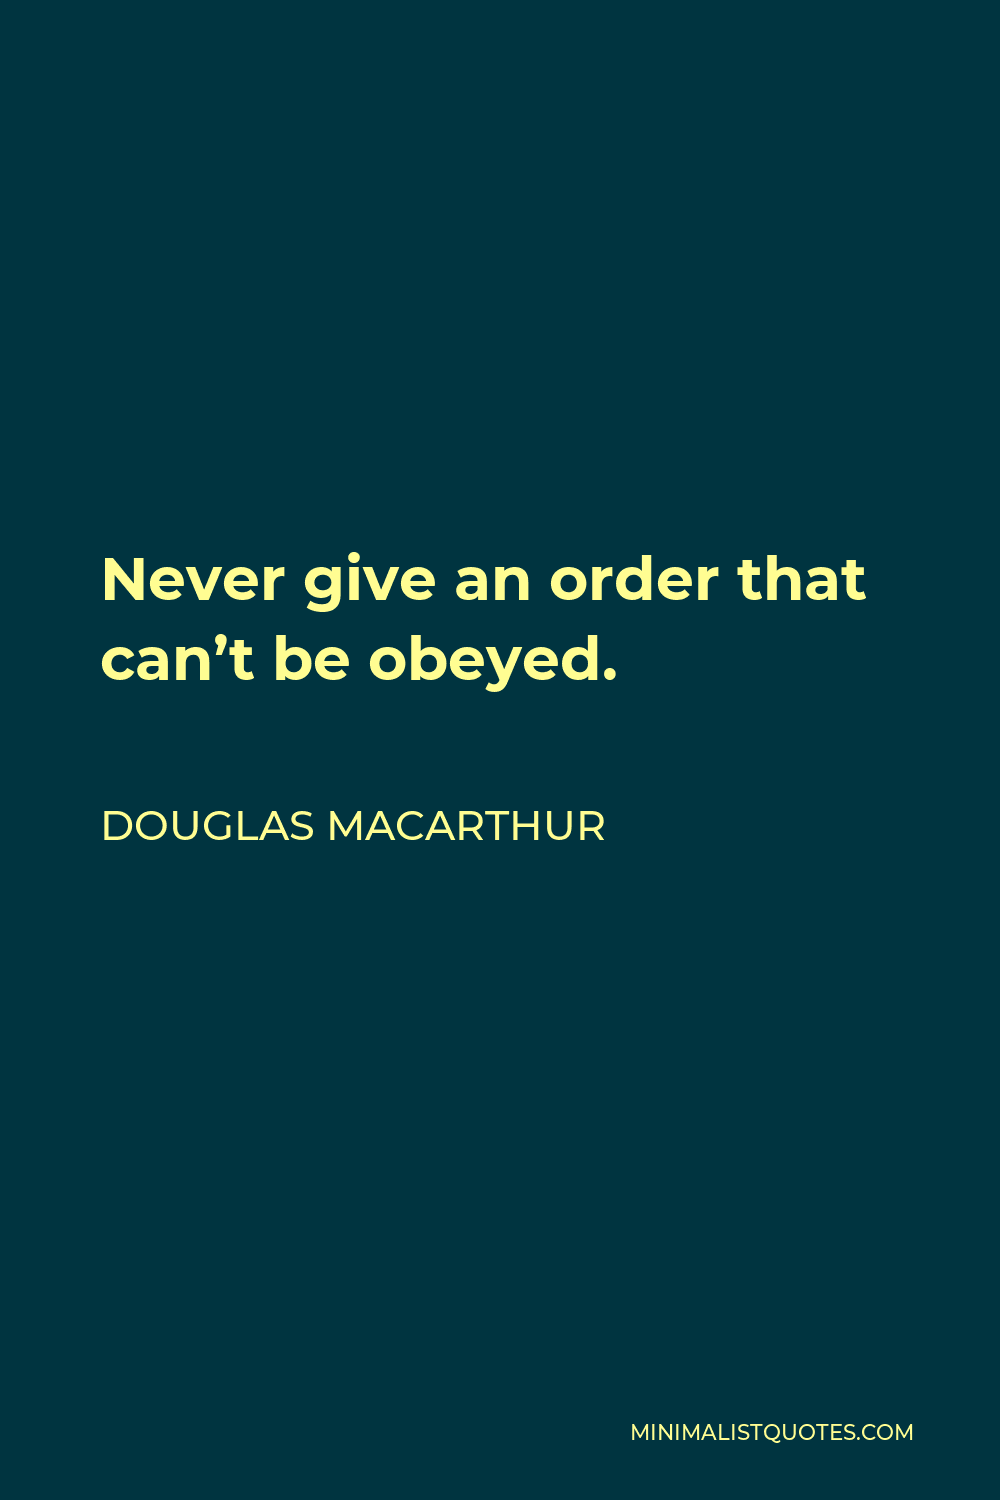 Douglas MacArthur Quote - Never give an order that can’t be obeyed.